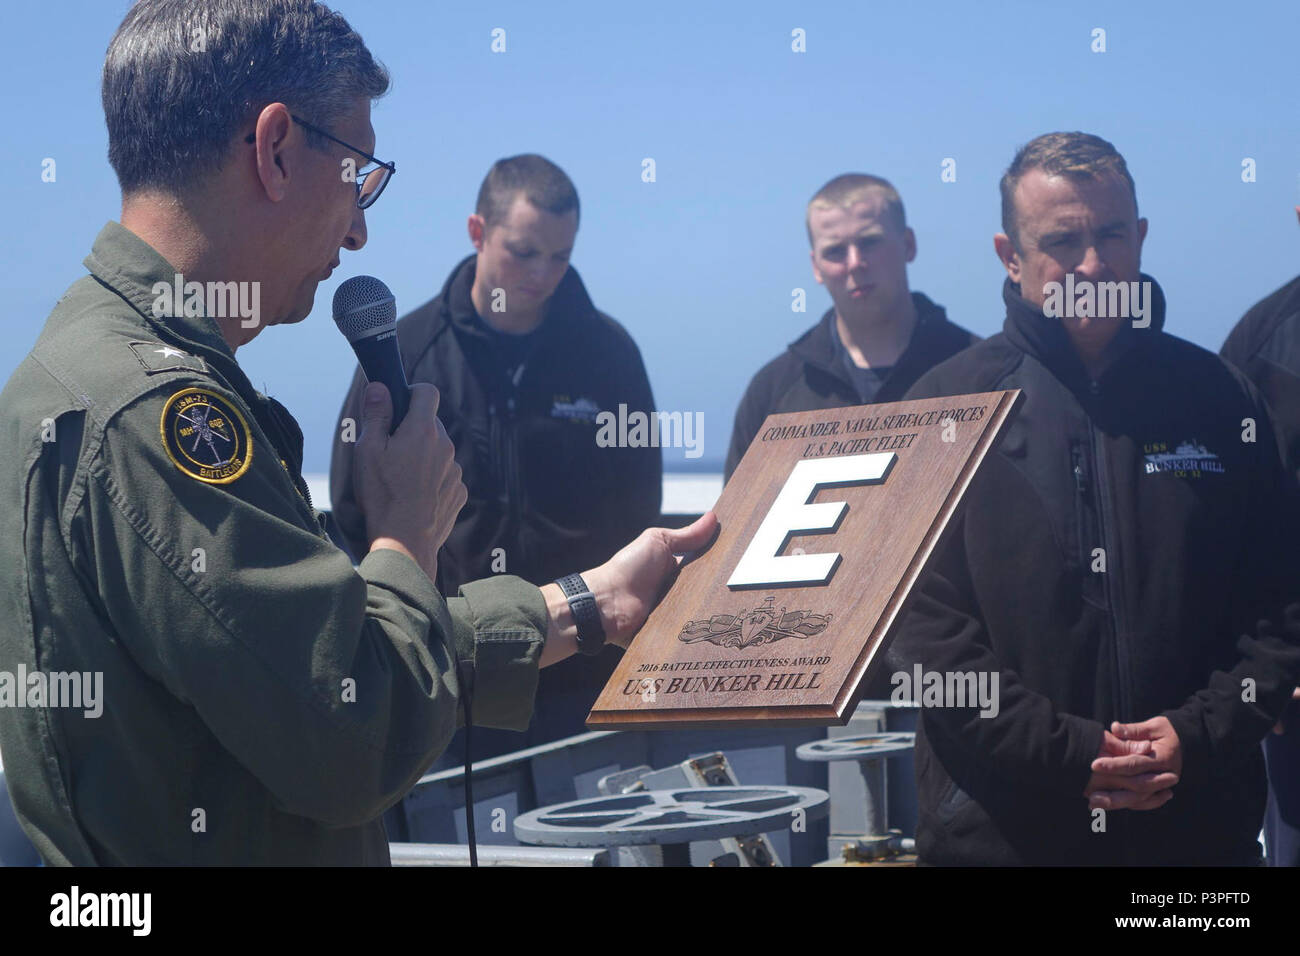 PACIFIC OCEAN (May 10, 2017) Rear Adm. Jay Bynum presents the 2016 Battle Effectiveness Award, Battle 'E,' to Capt. Joe Cahill, commanding officer of the guided-missile cruiser USS Bunker Hill (CG 52). Bunker Hill is underway participating in a group sail training unit exercise with the Theodore Roosevelt Carrier Strike Group. Group sail is the first step in Bunker Hill’s integrated training phase and aims to enhance mission-readiness and warfighting capabilities between the ships, air wings and the staffs through simulated real-world scenarios. Stock Photo